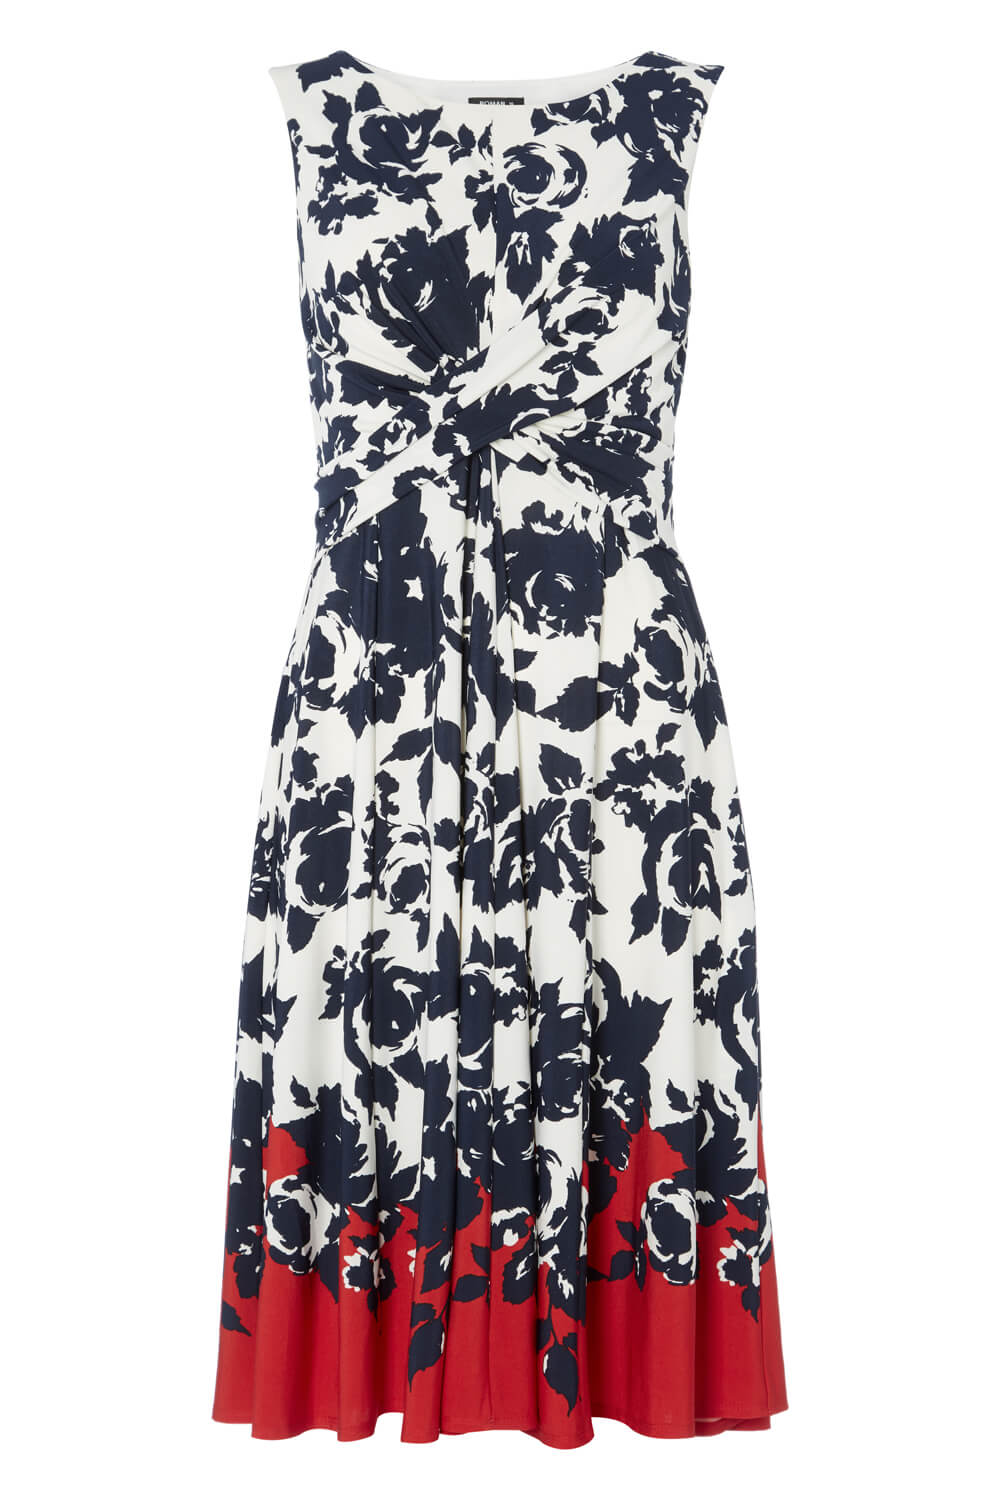 Floral Twist Waist Fit and Flare Dress in Red - Roman Originals UK